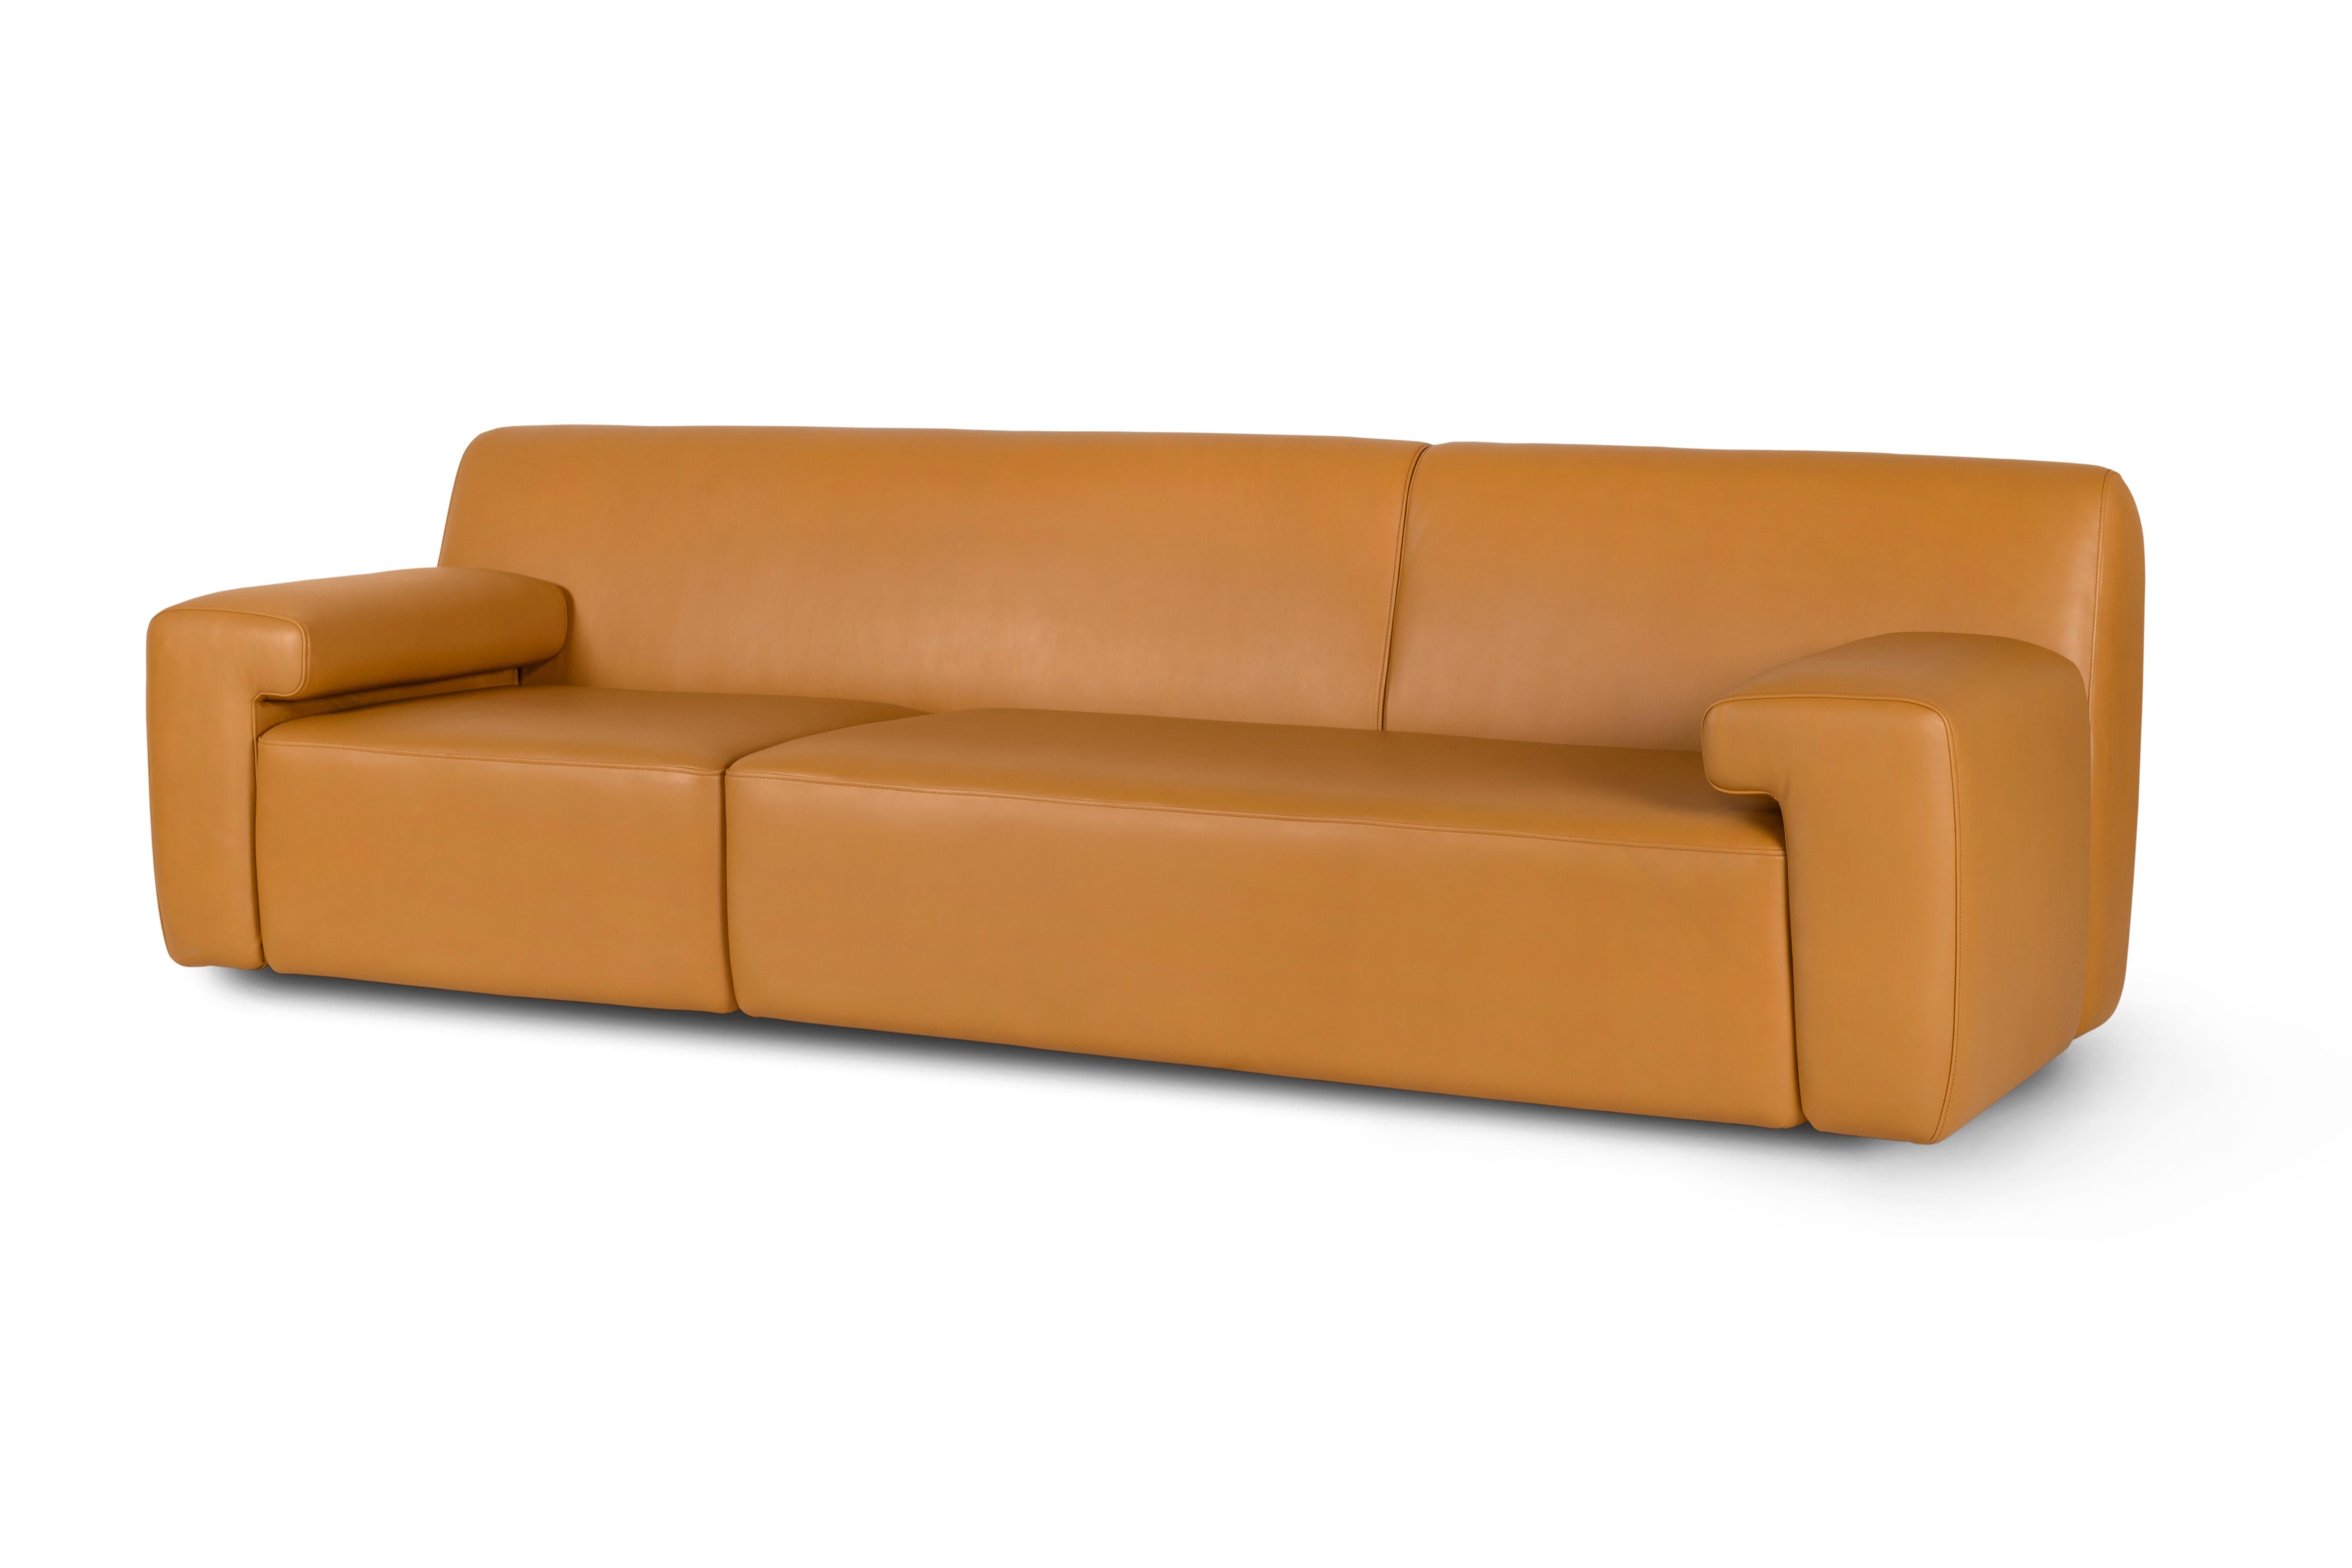 Modern Almourol Sofa, Olive Green Leather, Handmade in Portugal by Greenapple For Sale 6